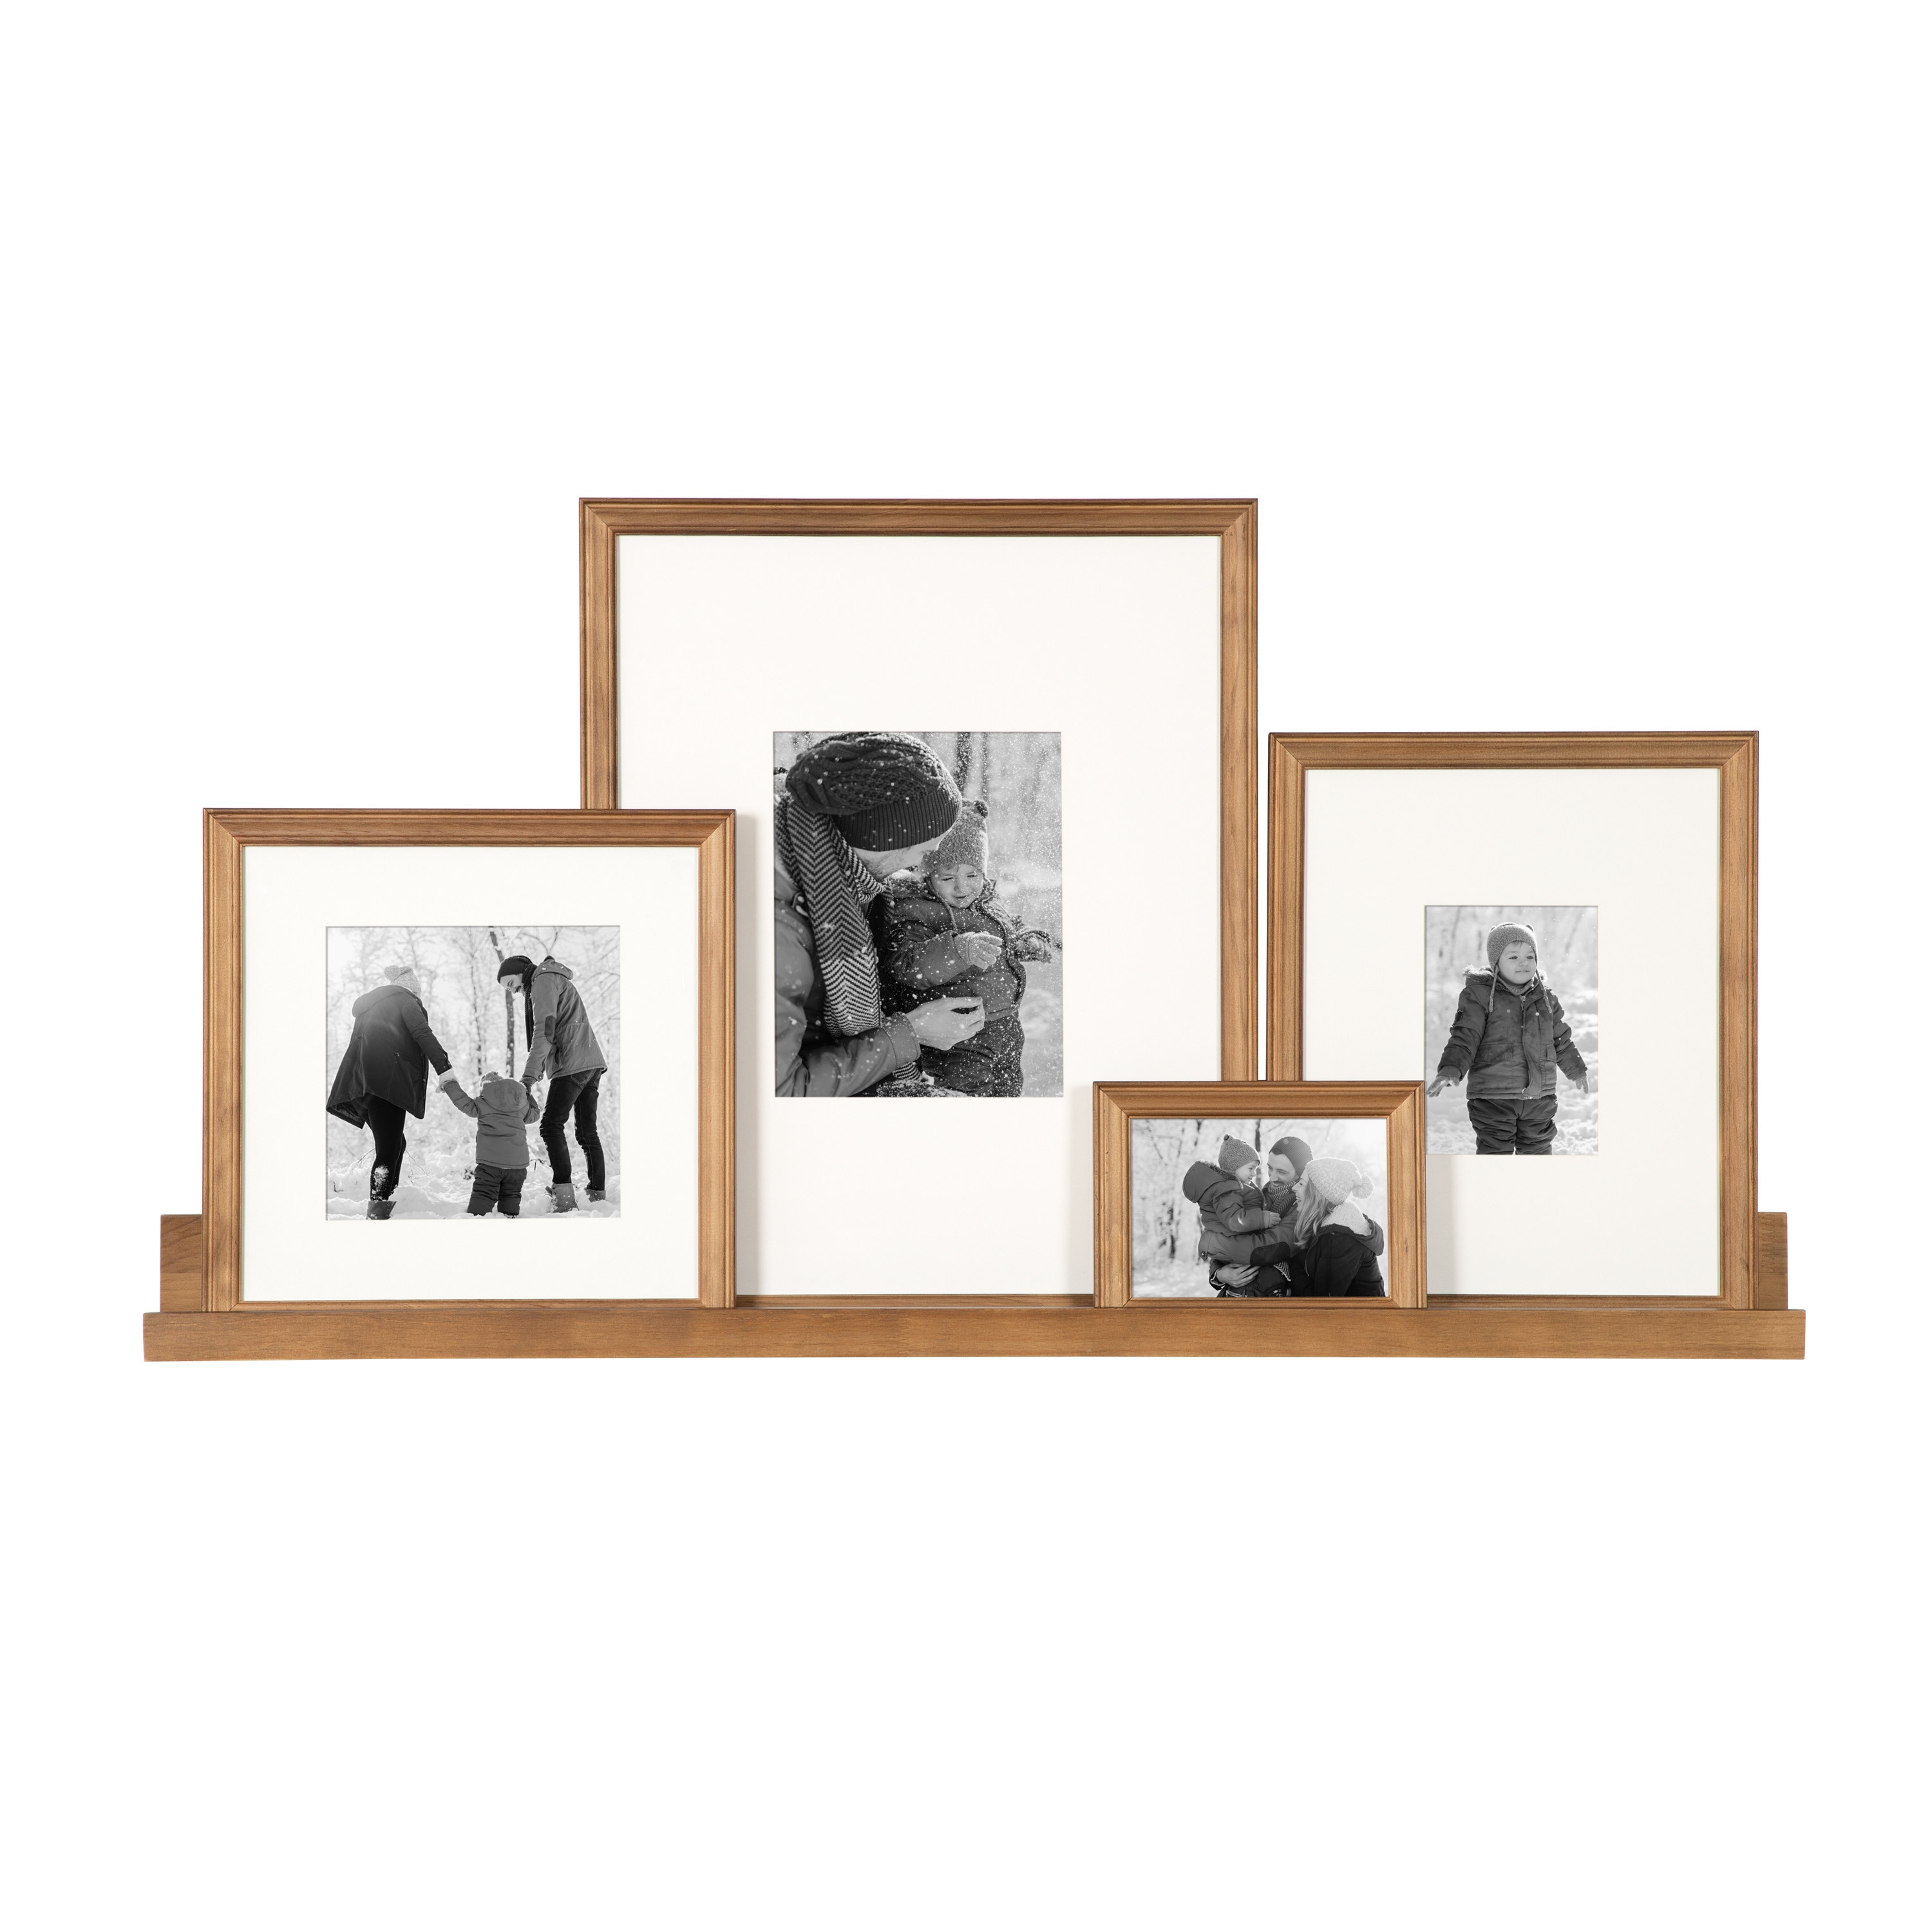 show original title Details about   Picture Frame NEW GALERIA 53 Wood MDF Photo Poster Portrait Frame Gallery Timeless 